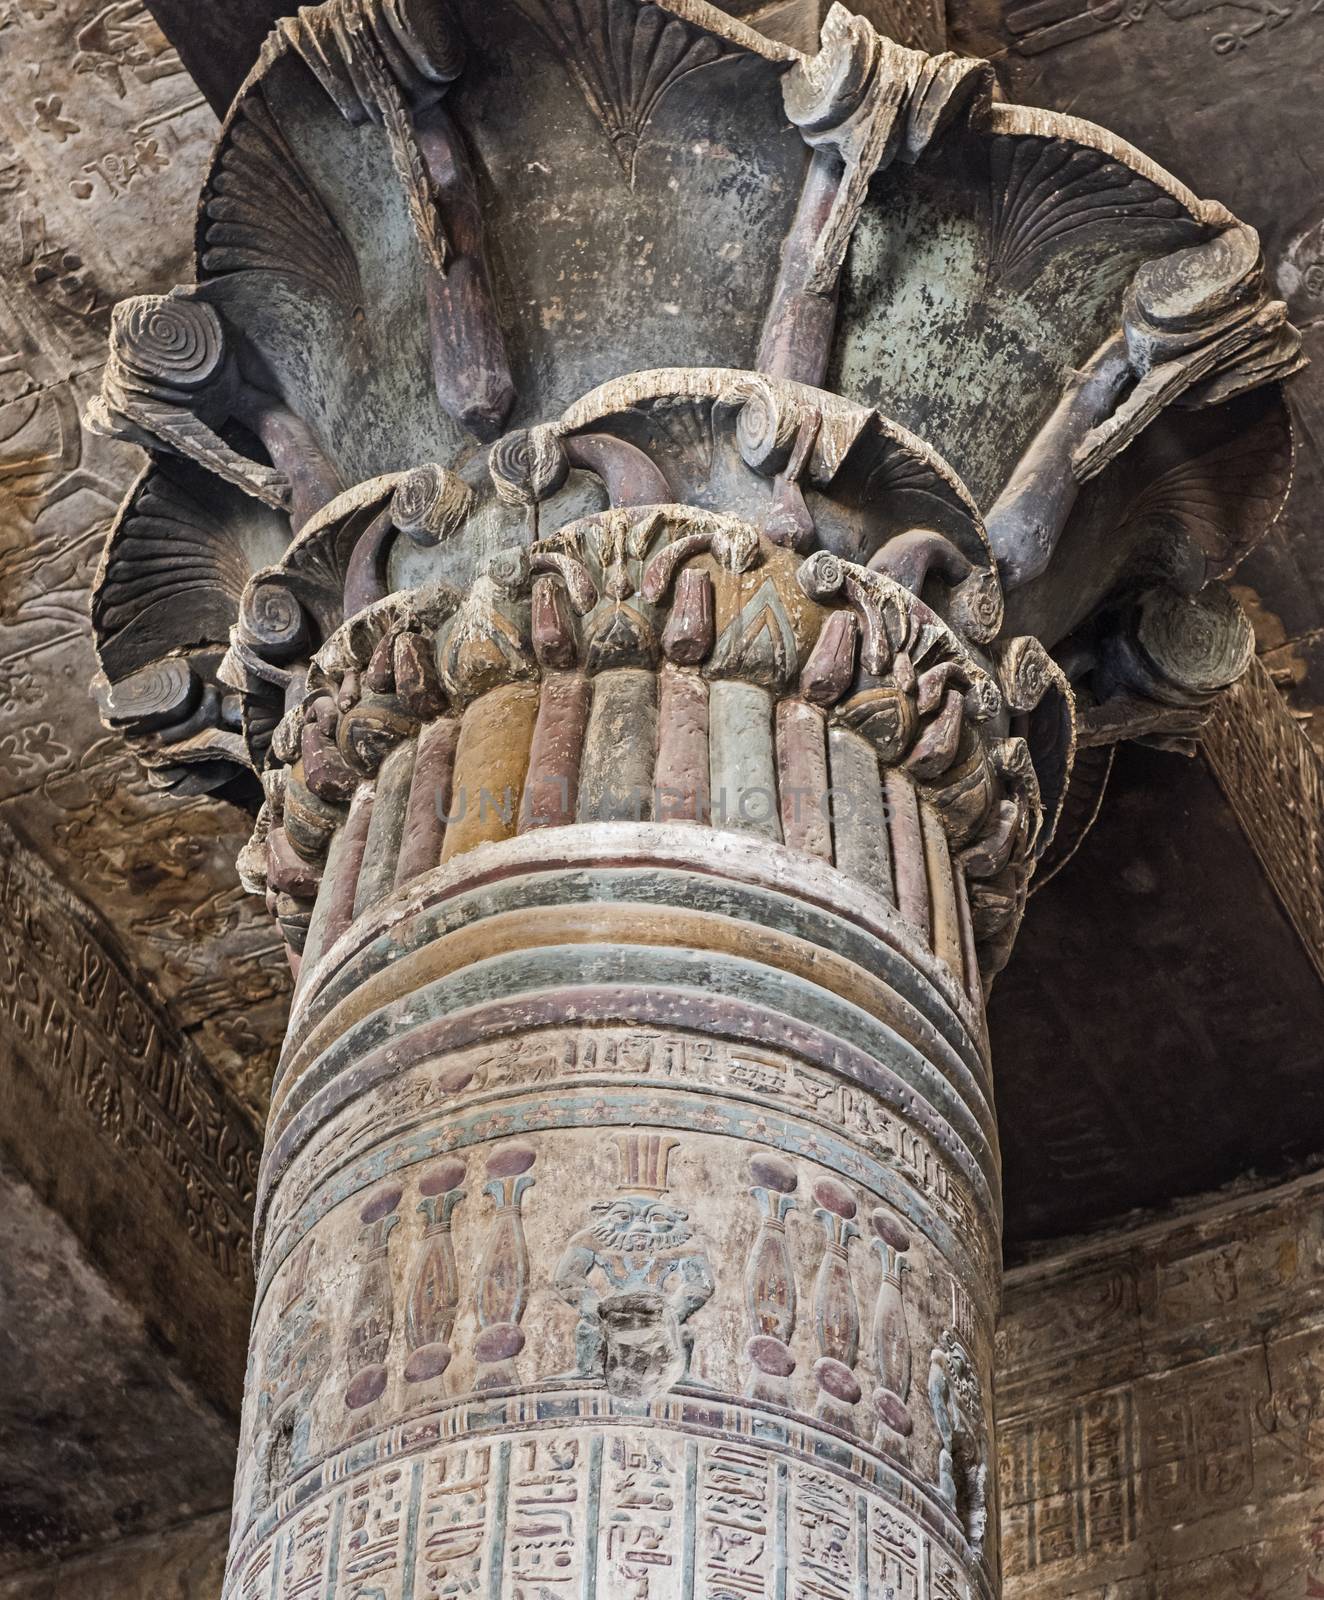 Columns in the ancient egyptian temple of Khnum at Esna with painted hieroglyphic carvings showing the god Bes